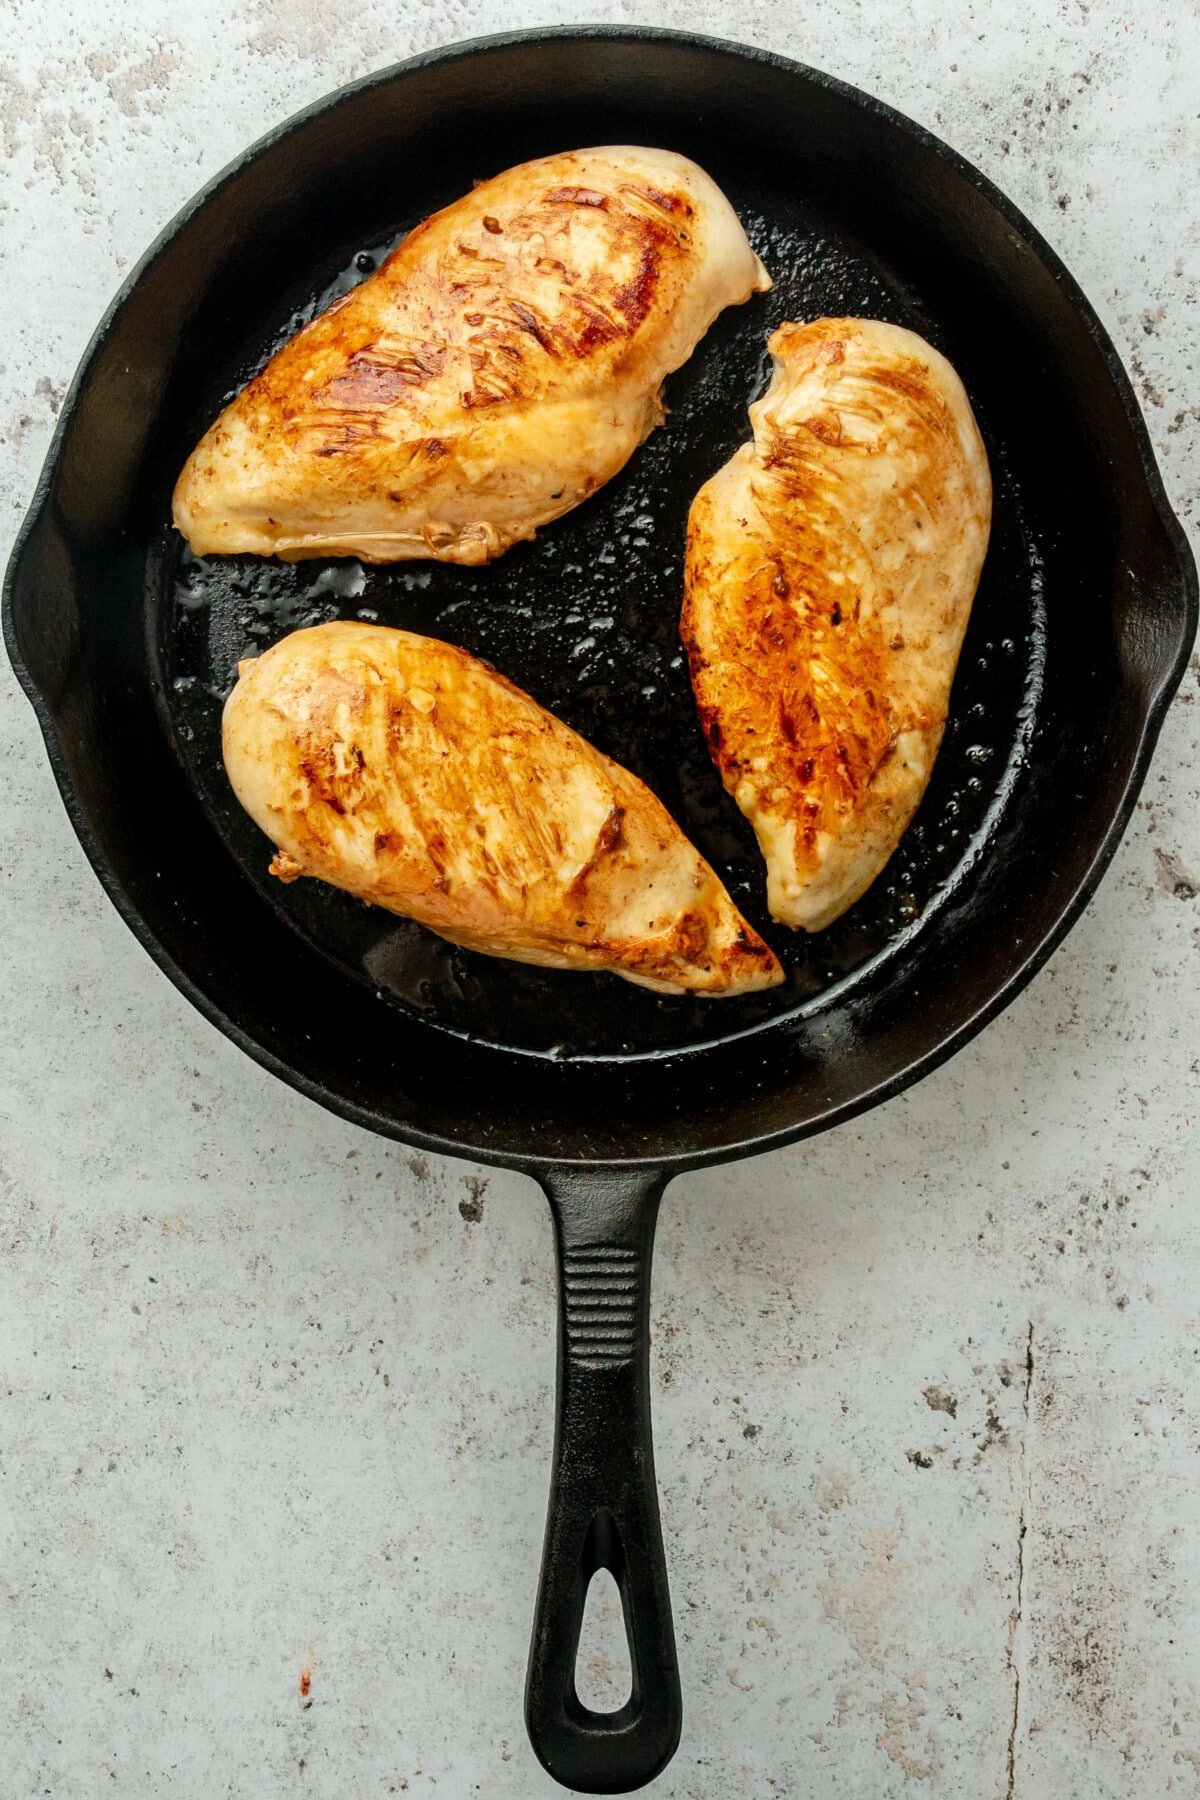 Browned chicken breasts sit in a cast iron skillet on a light grey surface.